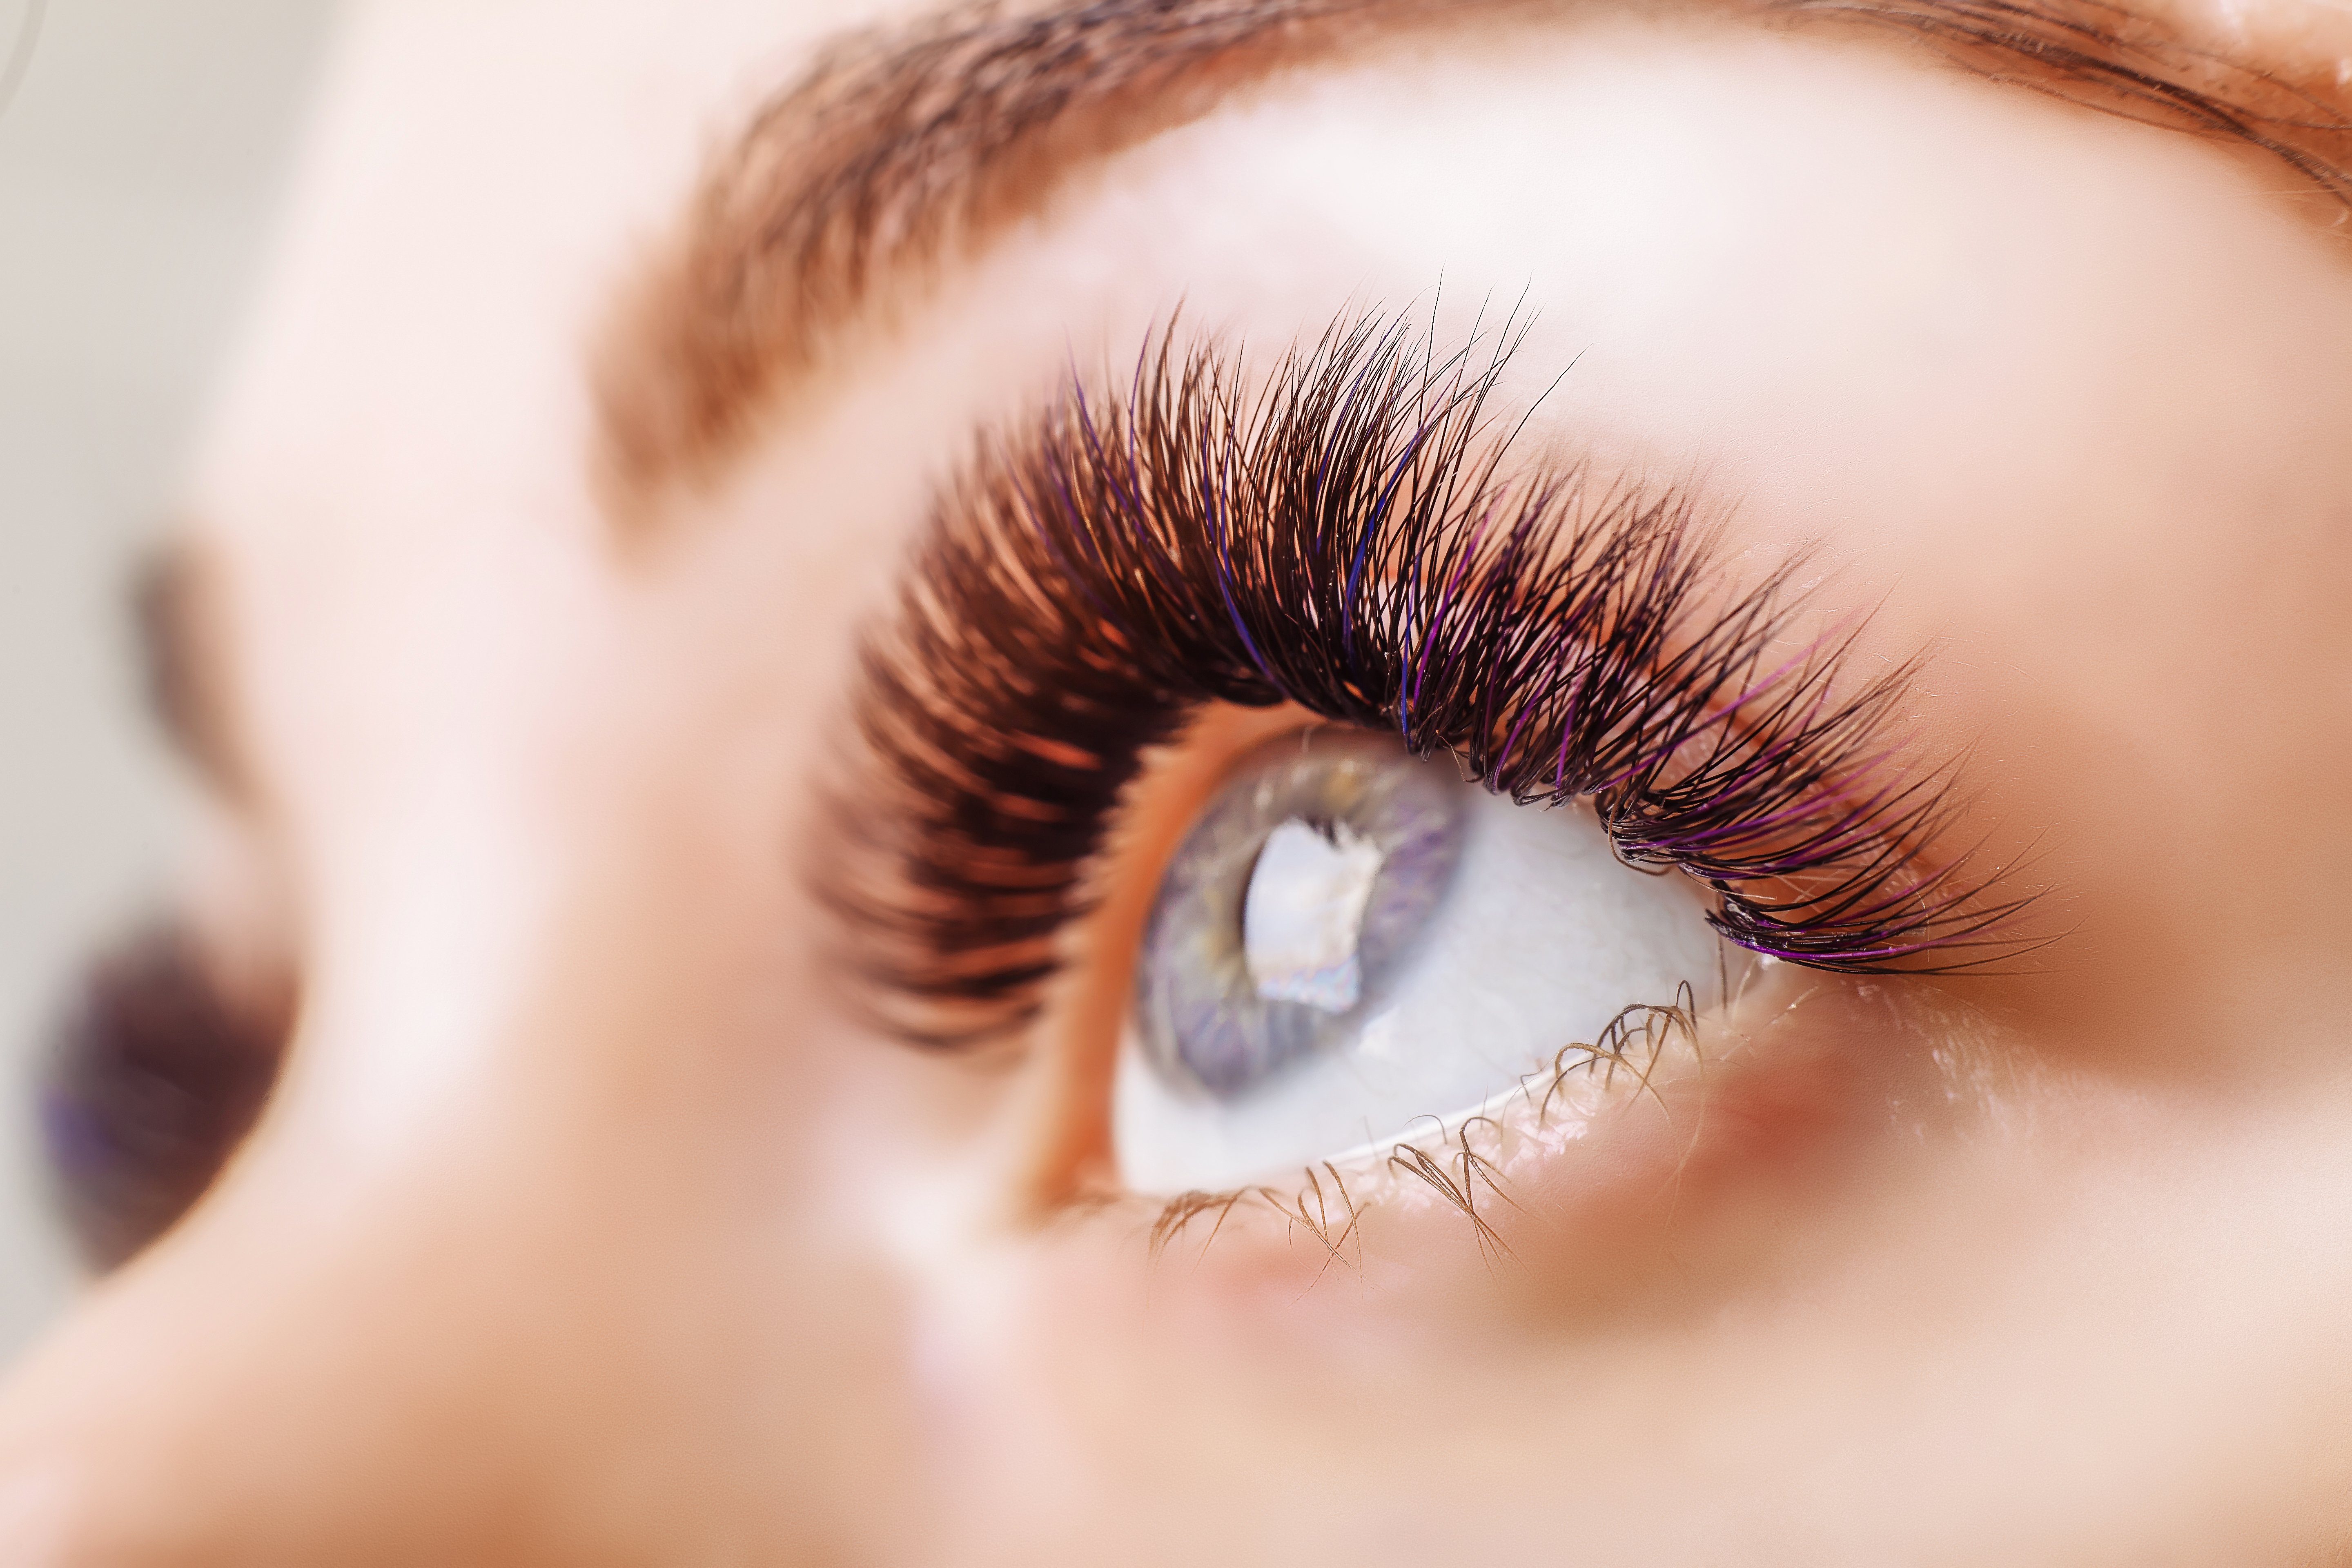 A photo of full and long lash extensions | Source: Getty Images